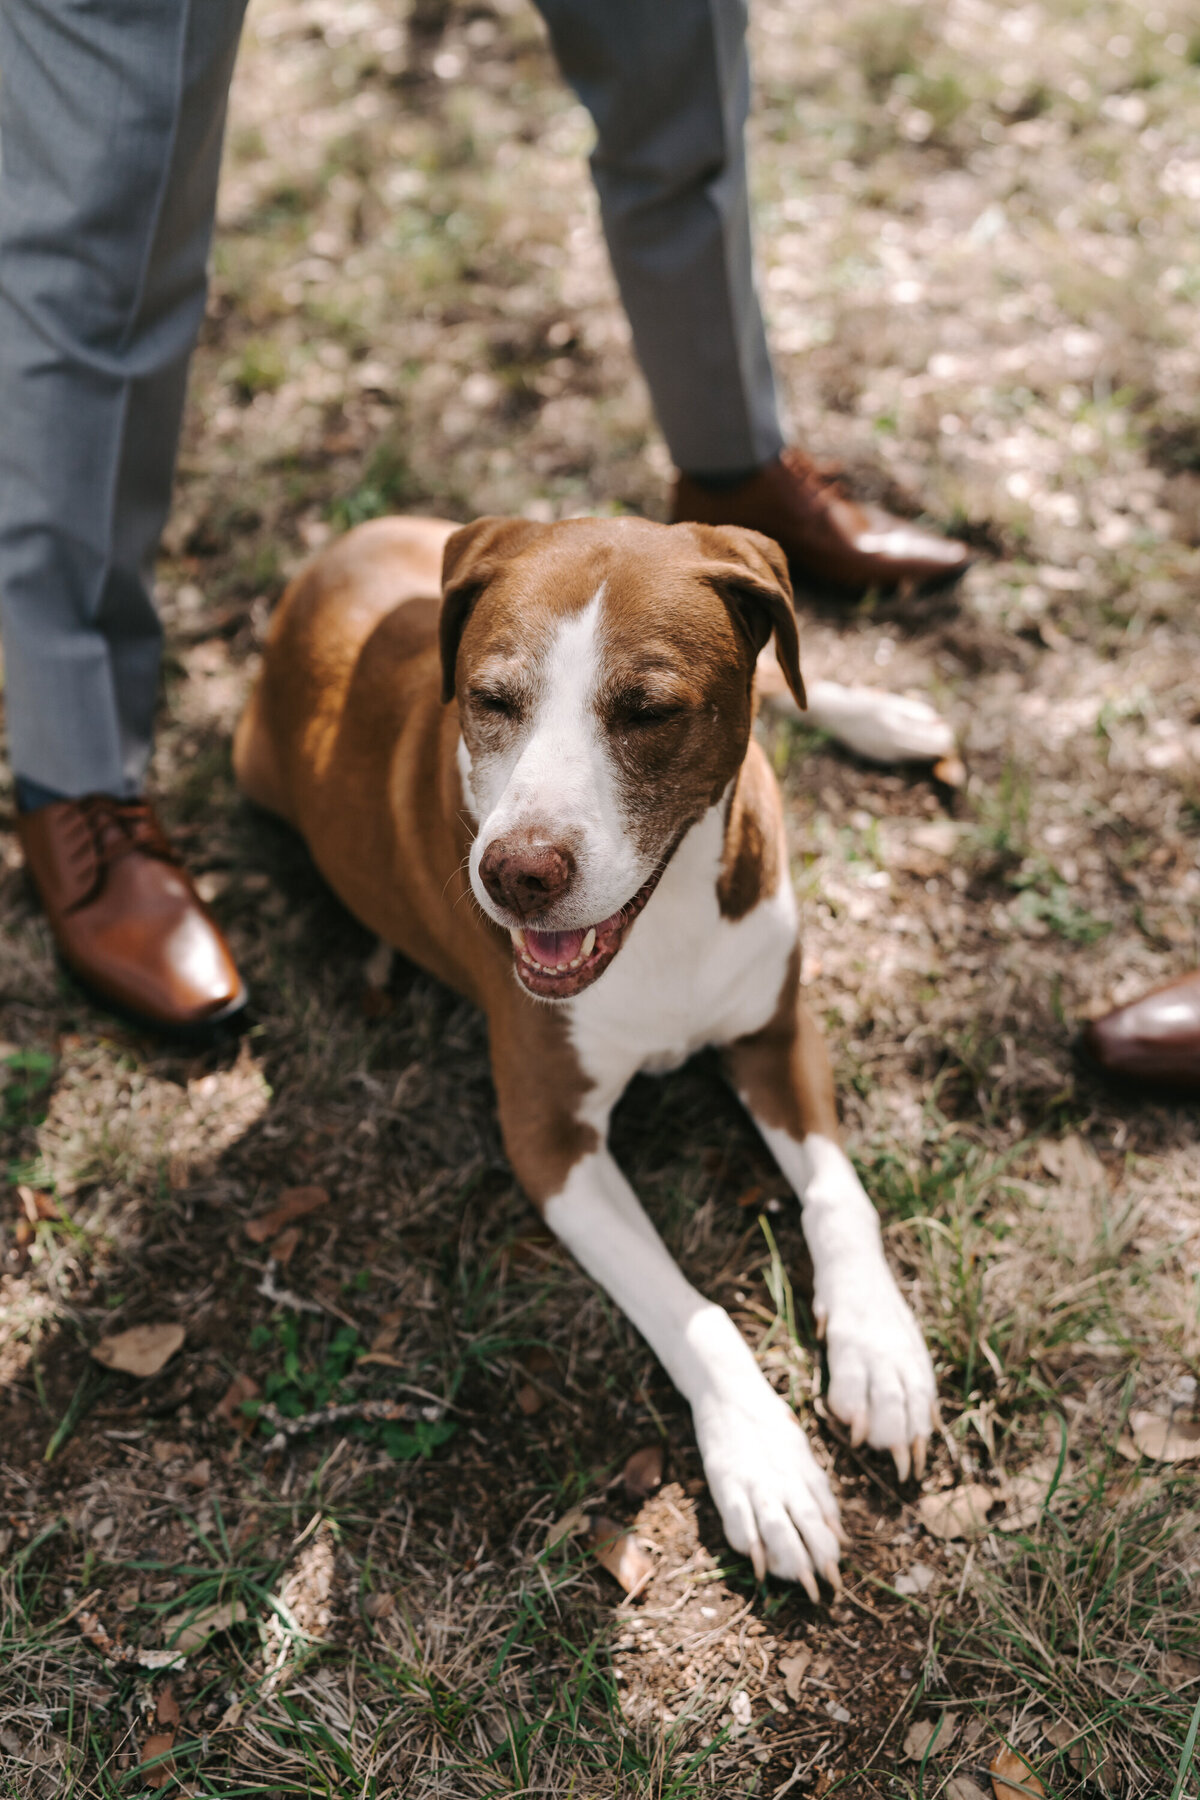 A photograph in color of Maggie, Arista and Sean’s dog, on their wedding day at Old Glory Ranch in Wimberley, Texas. Maggie is brown and white dog who is laying on the ground between Sean’s legs with her head up. Her eyes are closed as she looks to the side with what looks like a smile on her face. Wedding photography by Stacie McChesney of Vitae Weddings.